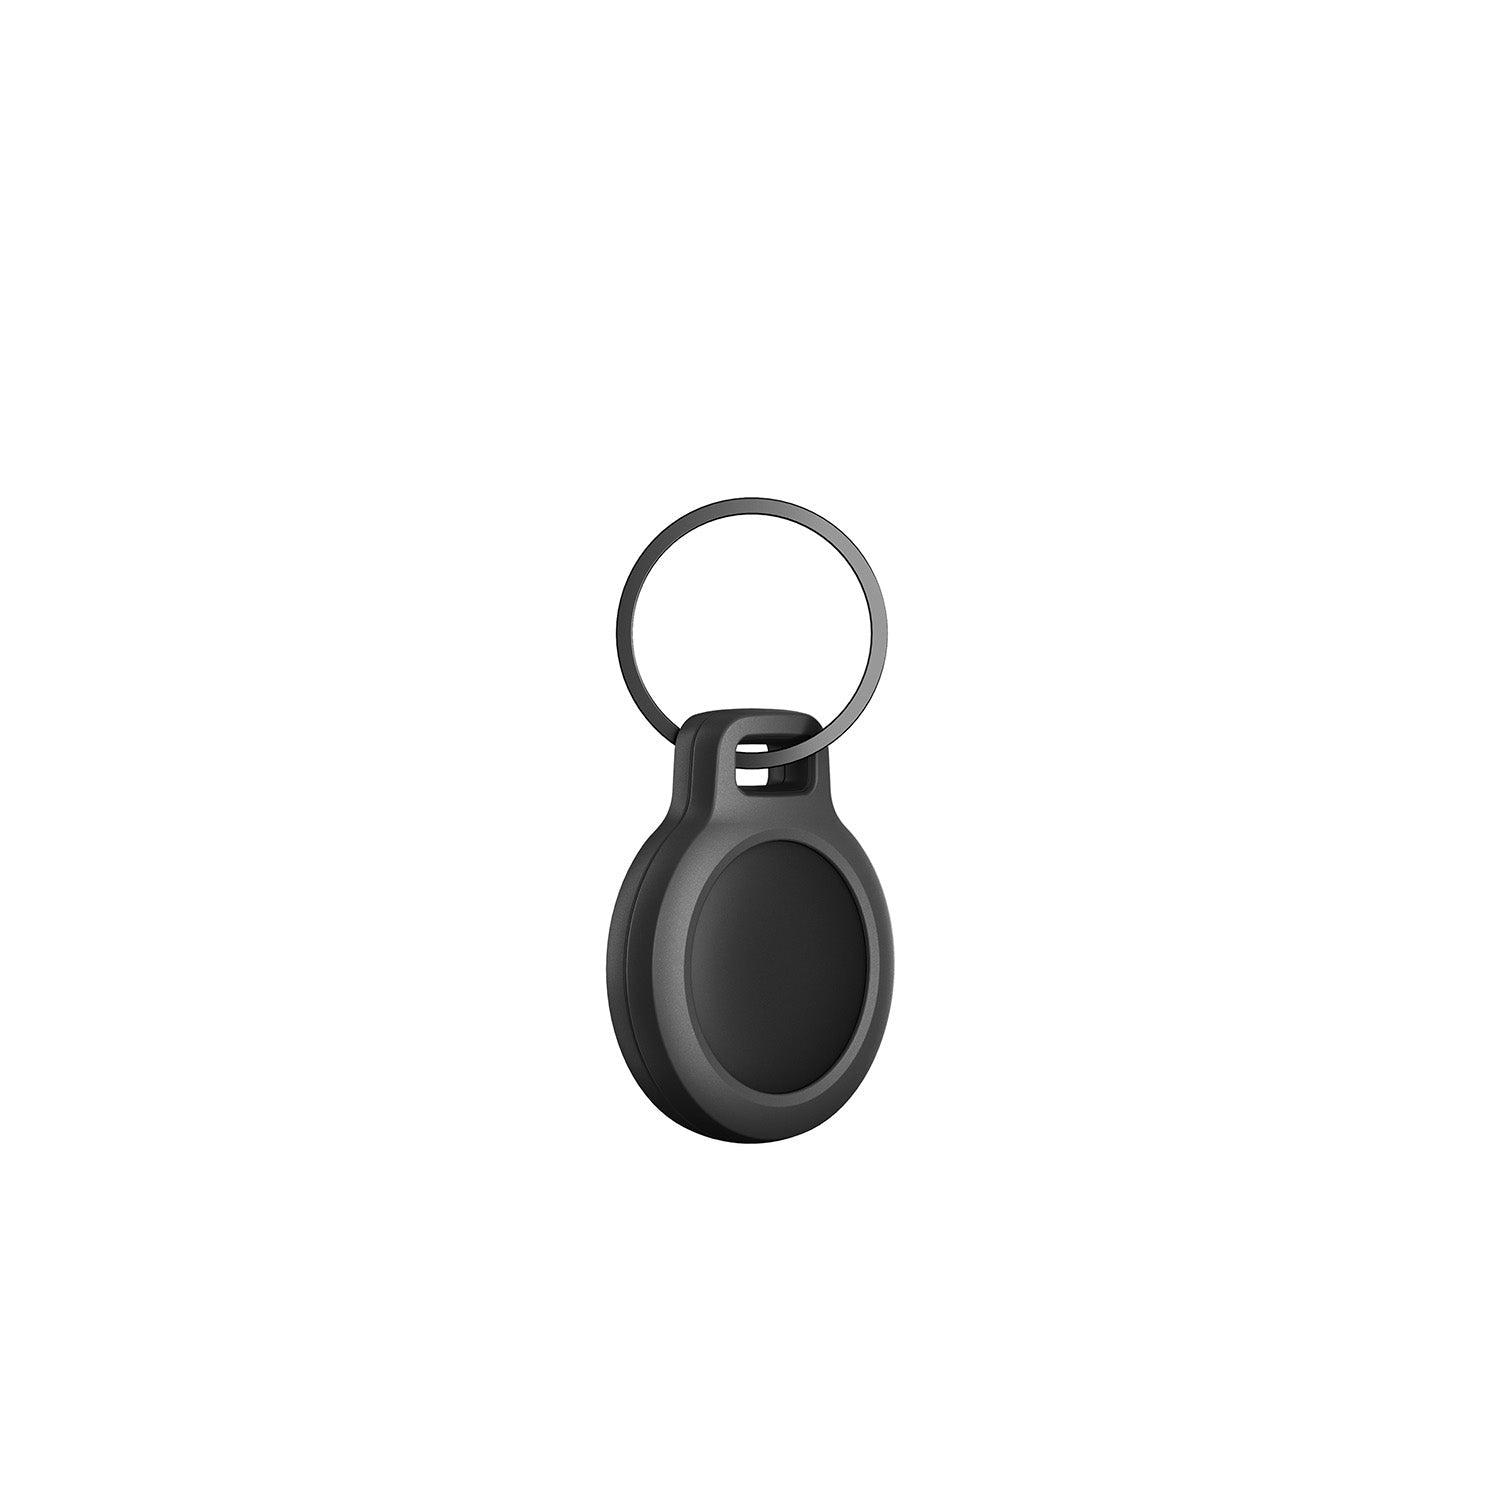 Nomad launches AirTag Rugged Keychain, pet ID tag engraving